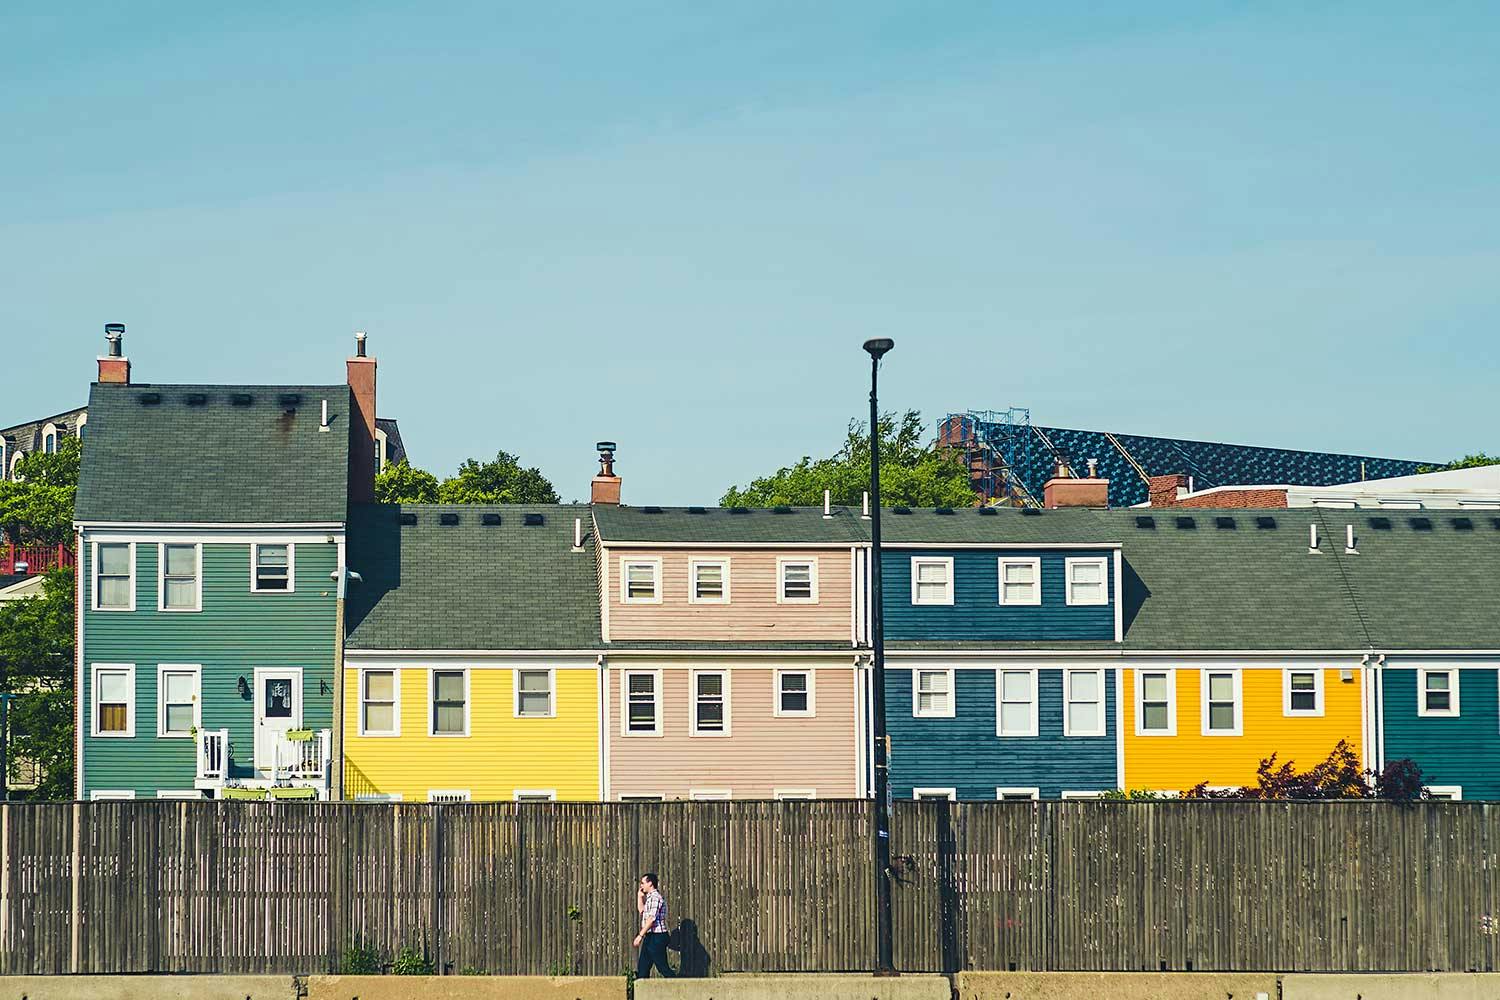 A row of colourfully painted houses with white framed windows.